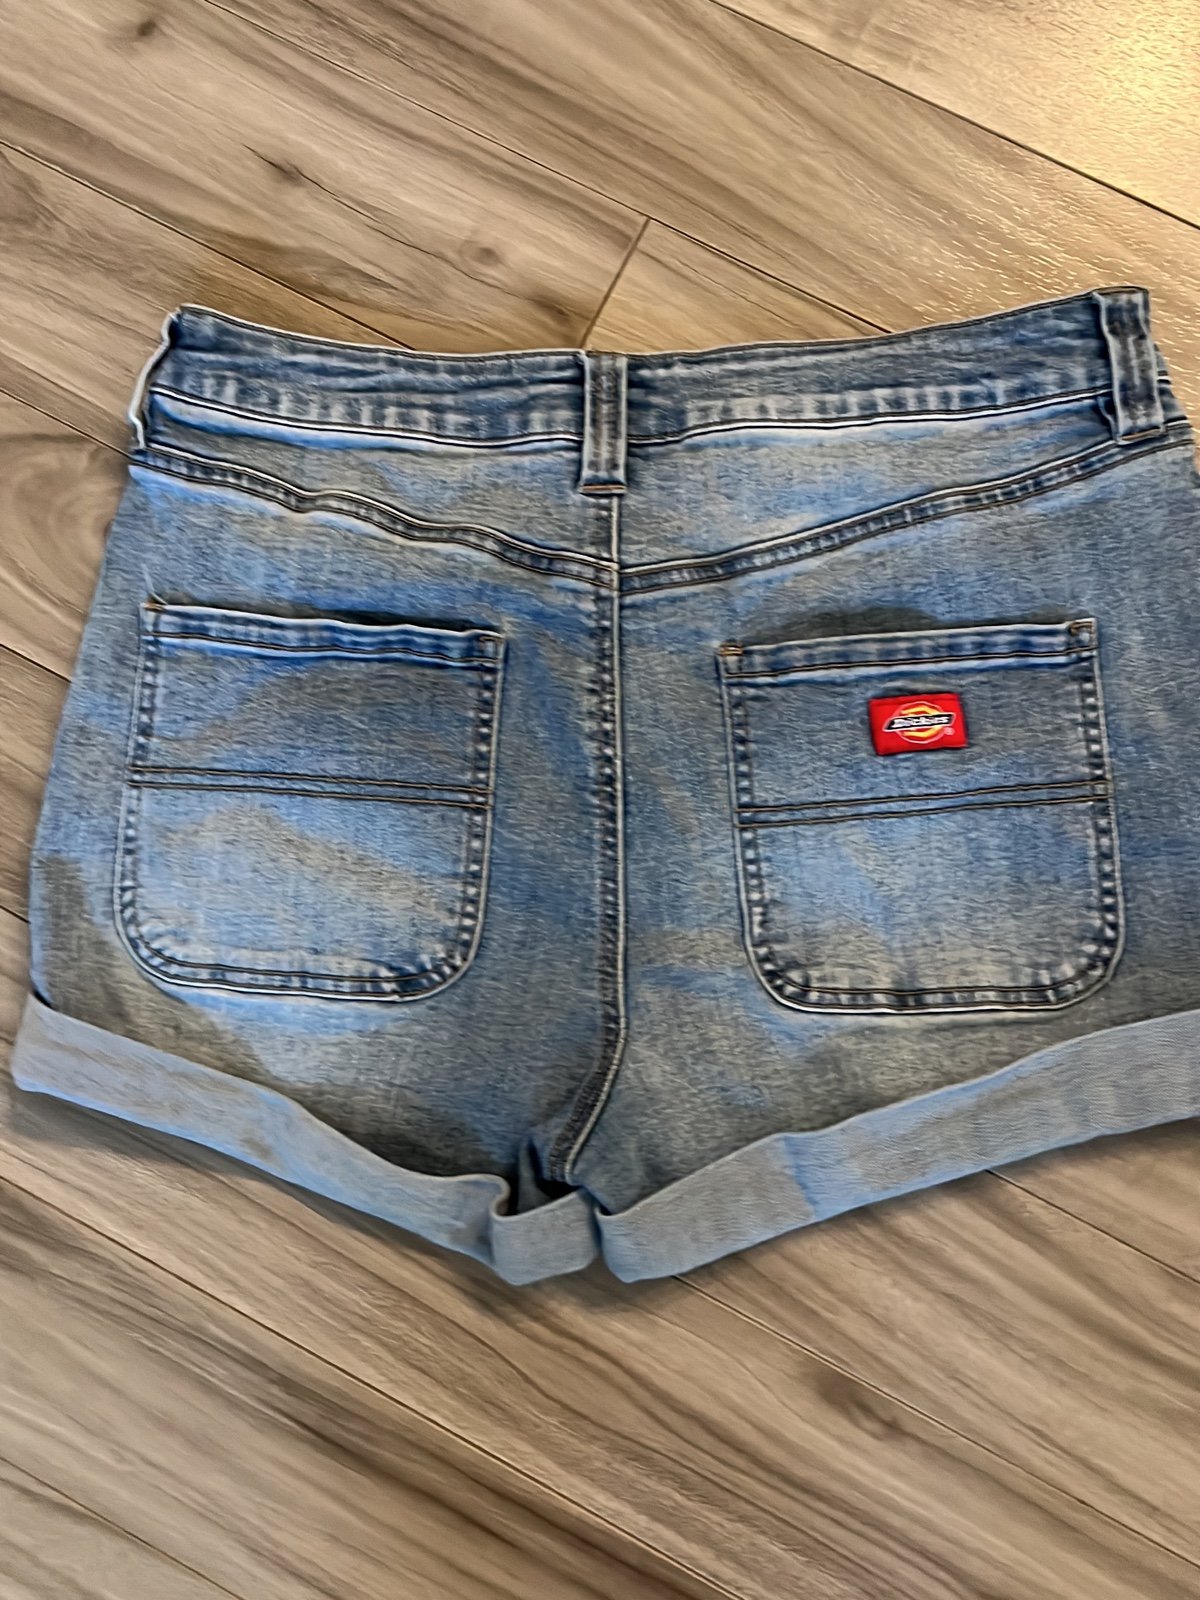 large discount Dickie Jean Shorts g03WJUtPL best sale